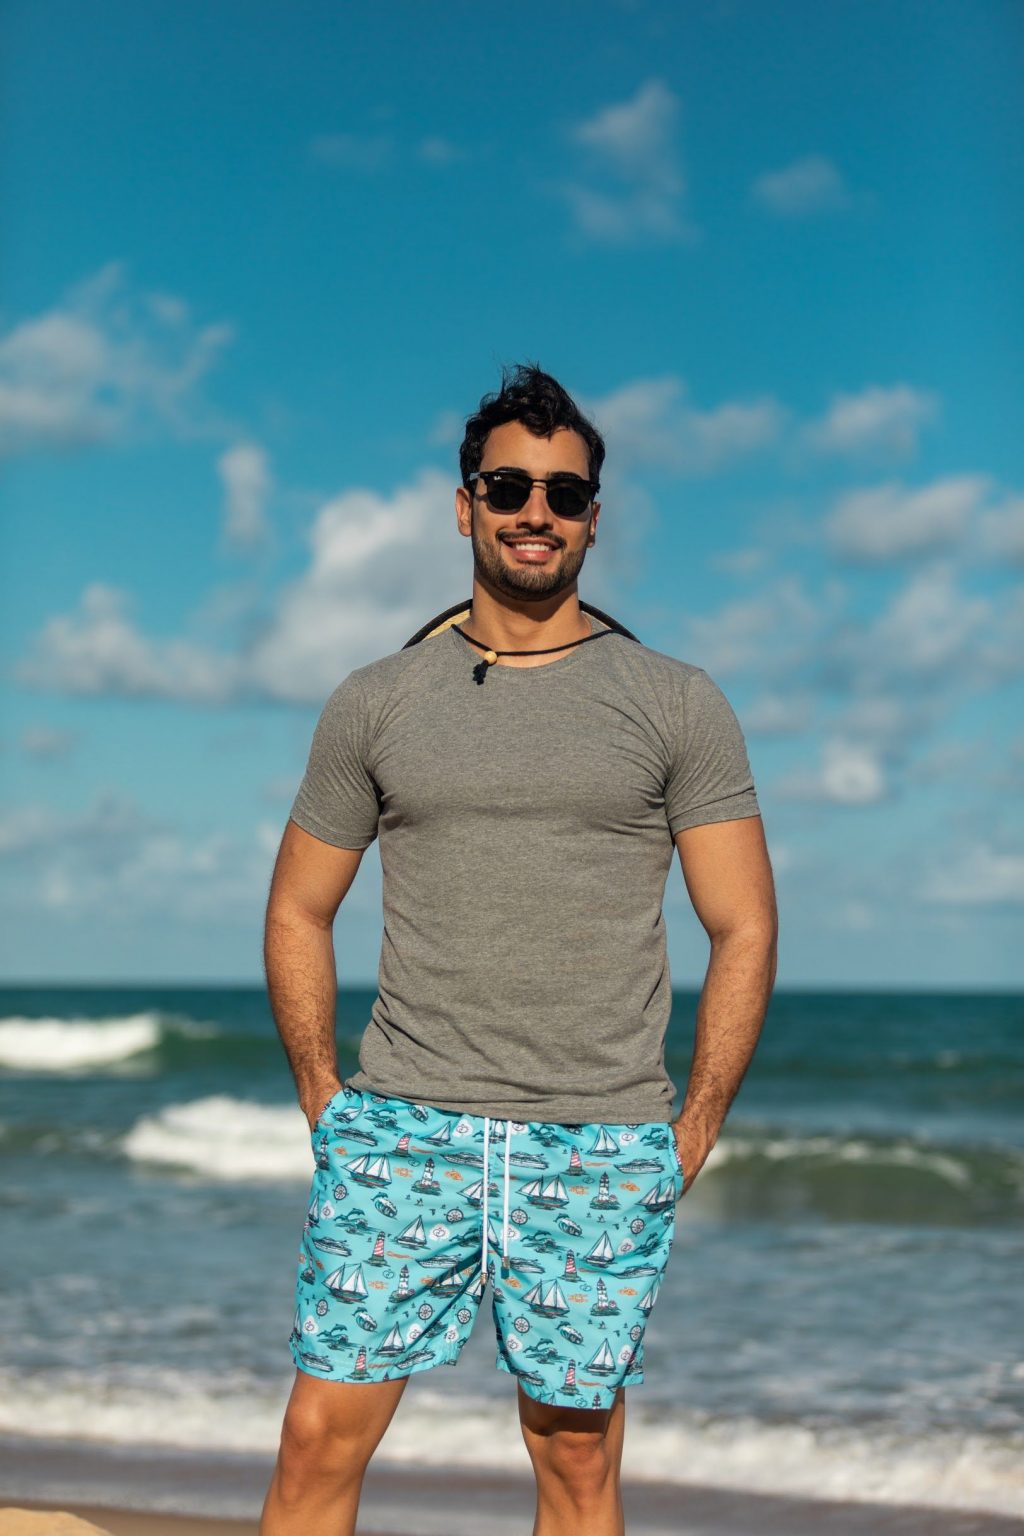 Aesthetic Men's Beach Outfits: Black Casual Summer Styles - A 2023 ...